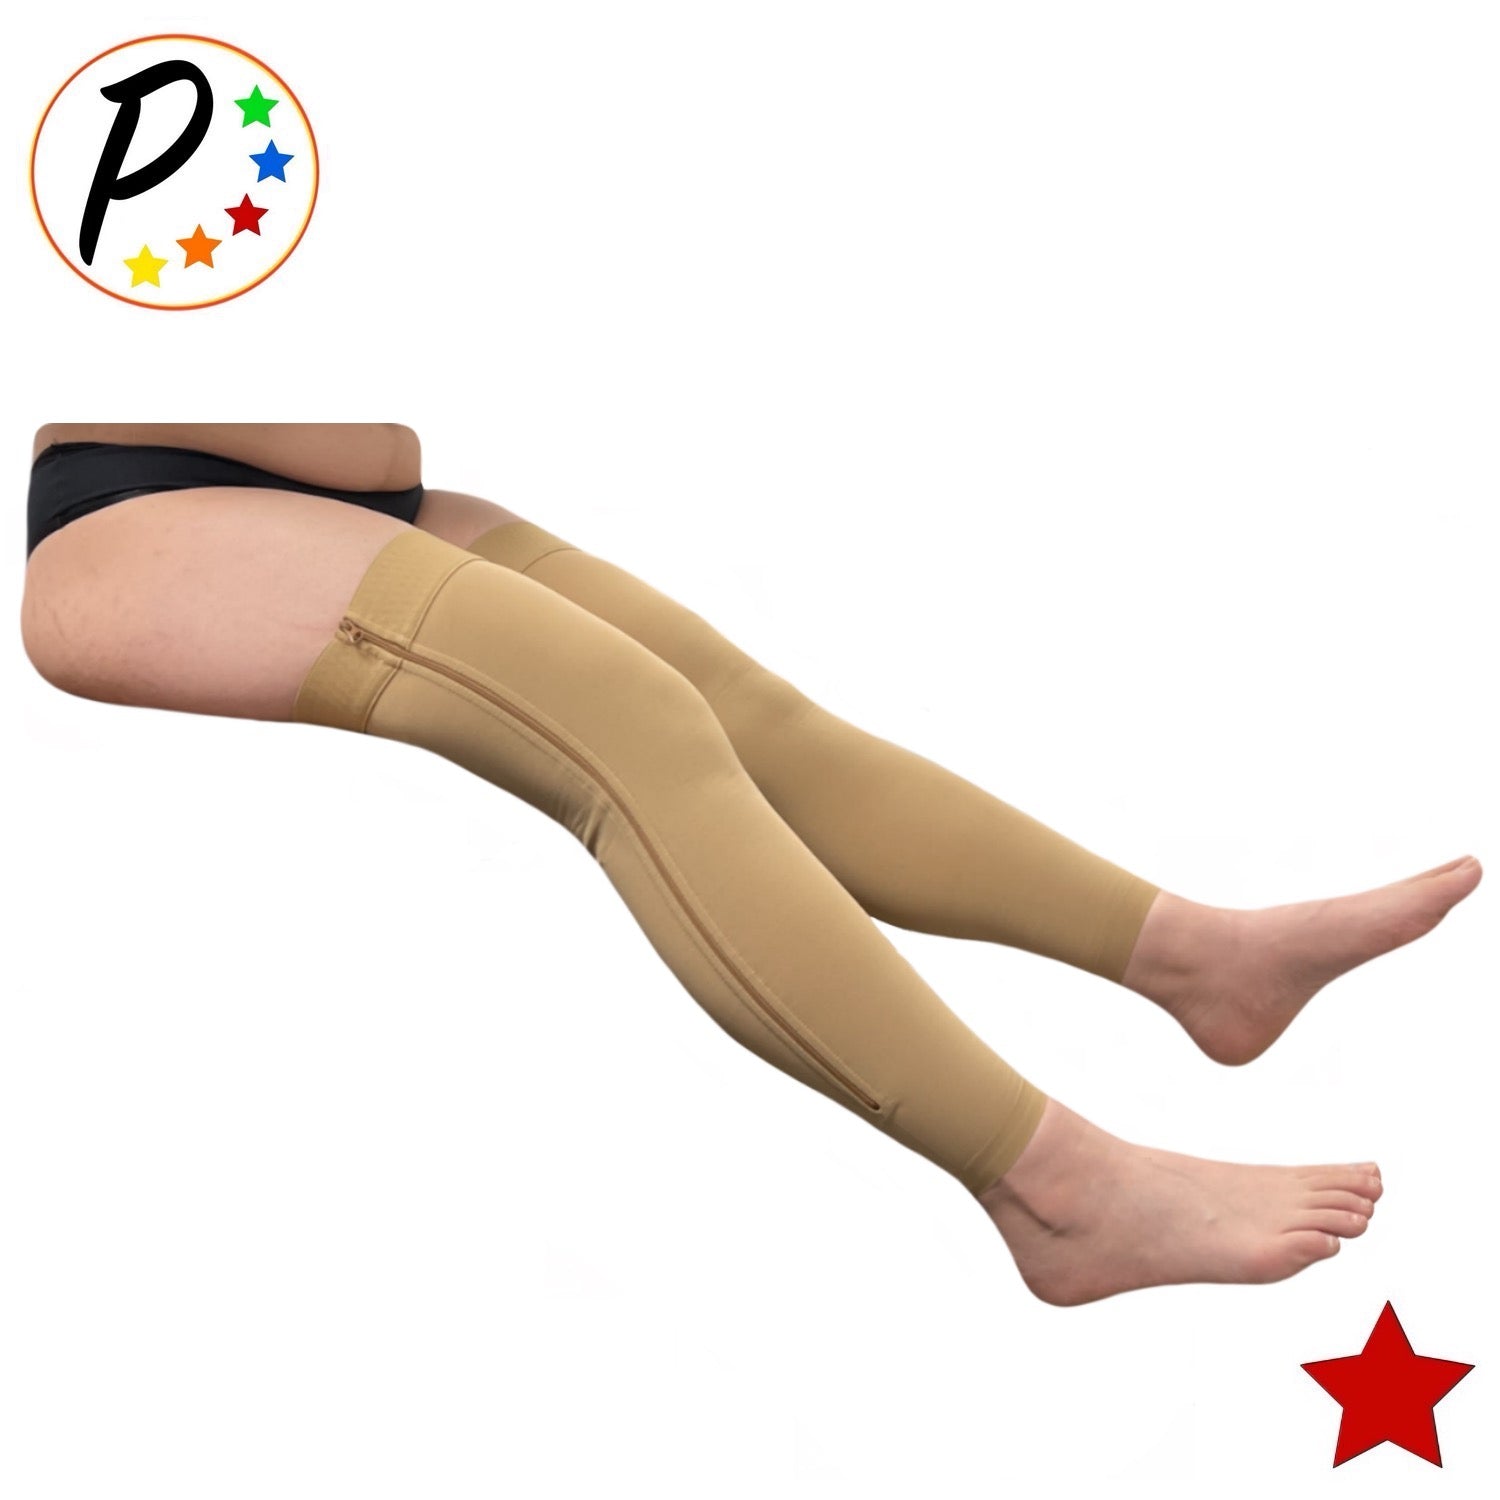 GLEMOSSLY Thigh High Medical Compression Stockings For Women & Men,Footless, Firm Support Hose 20-30